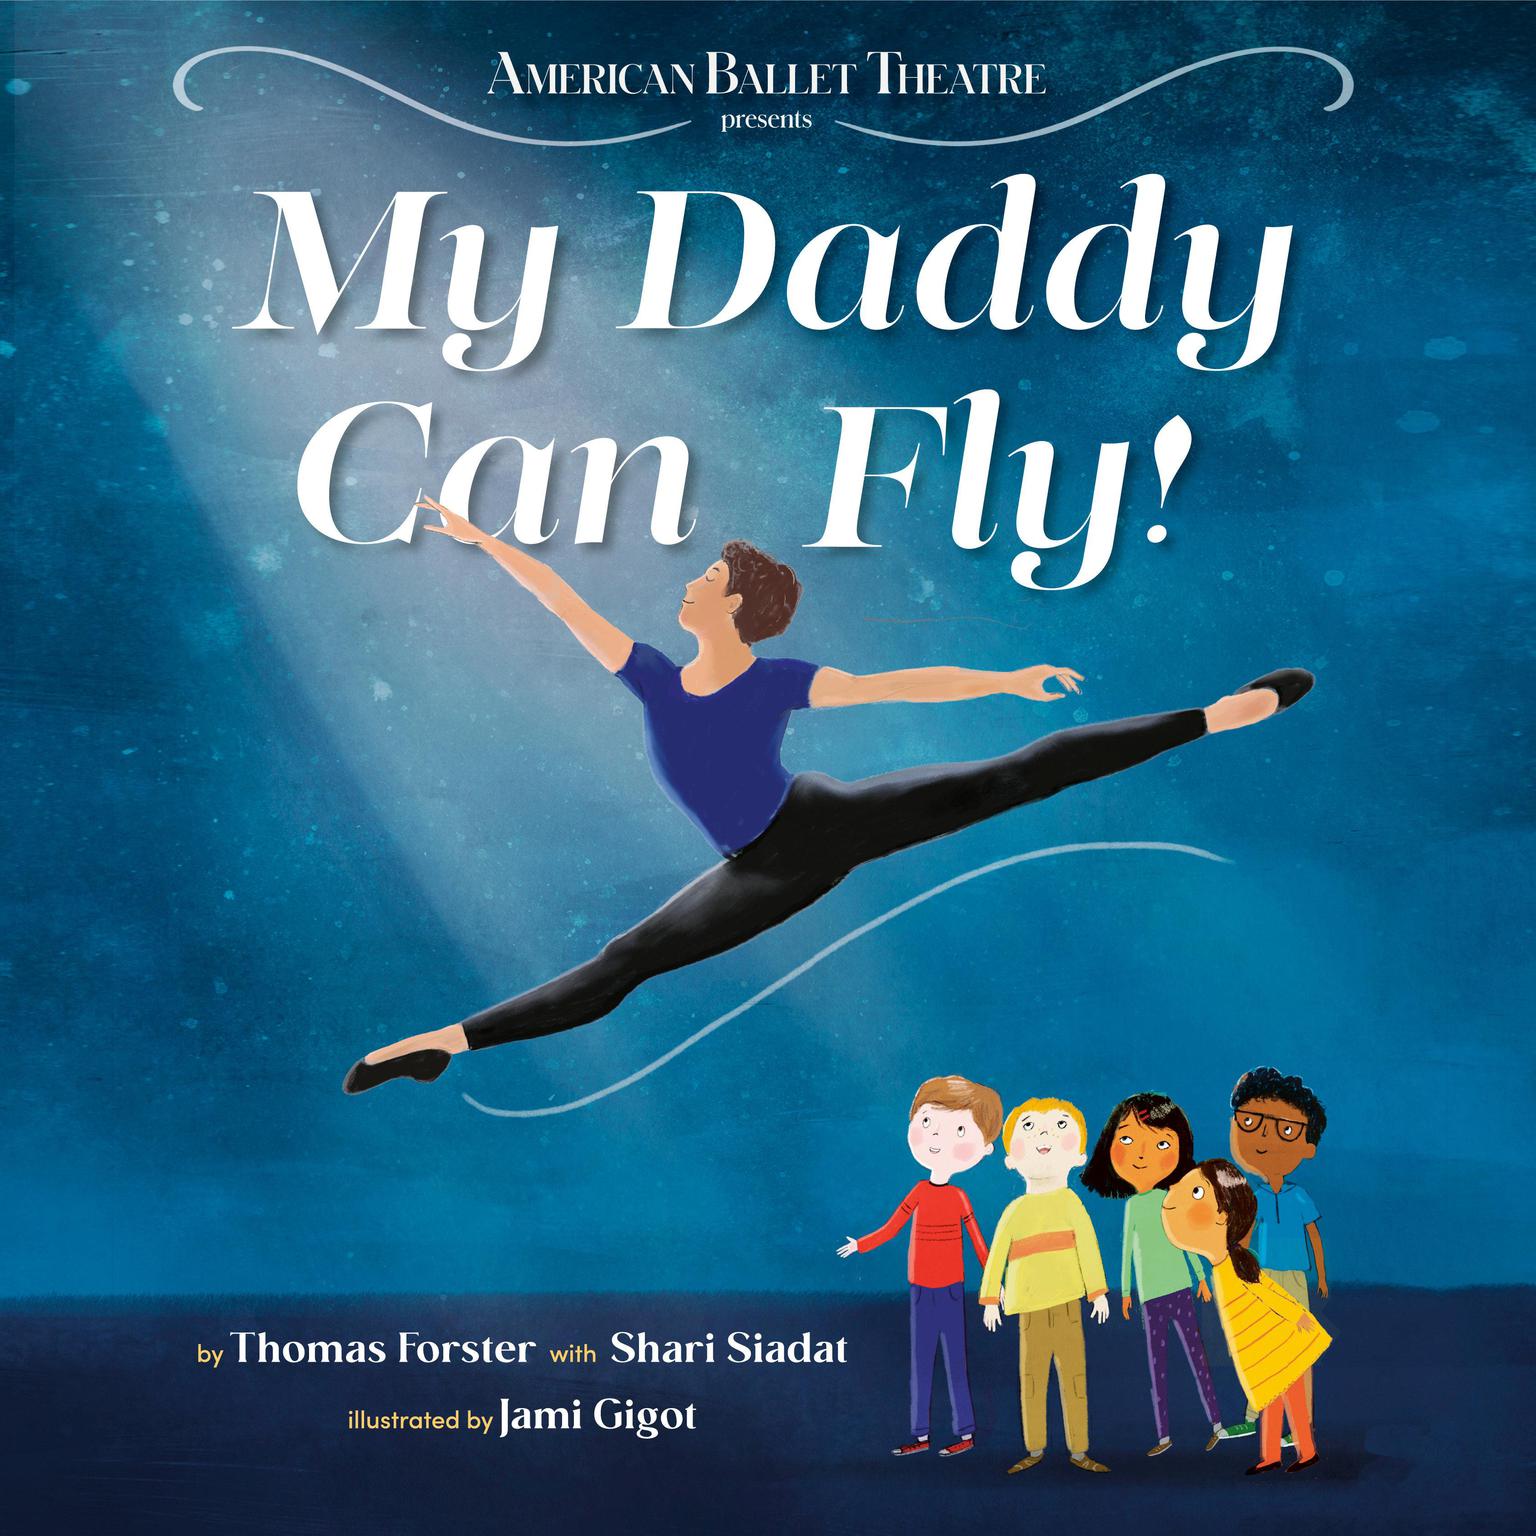 My Daddy Can Fly! (American Ballet Theatre) Audiobook, by Shari Siadat